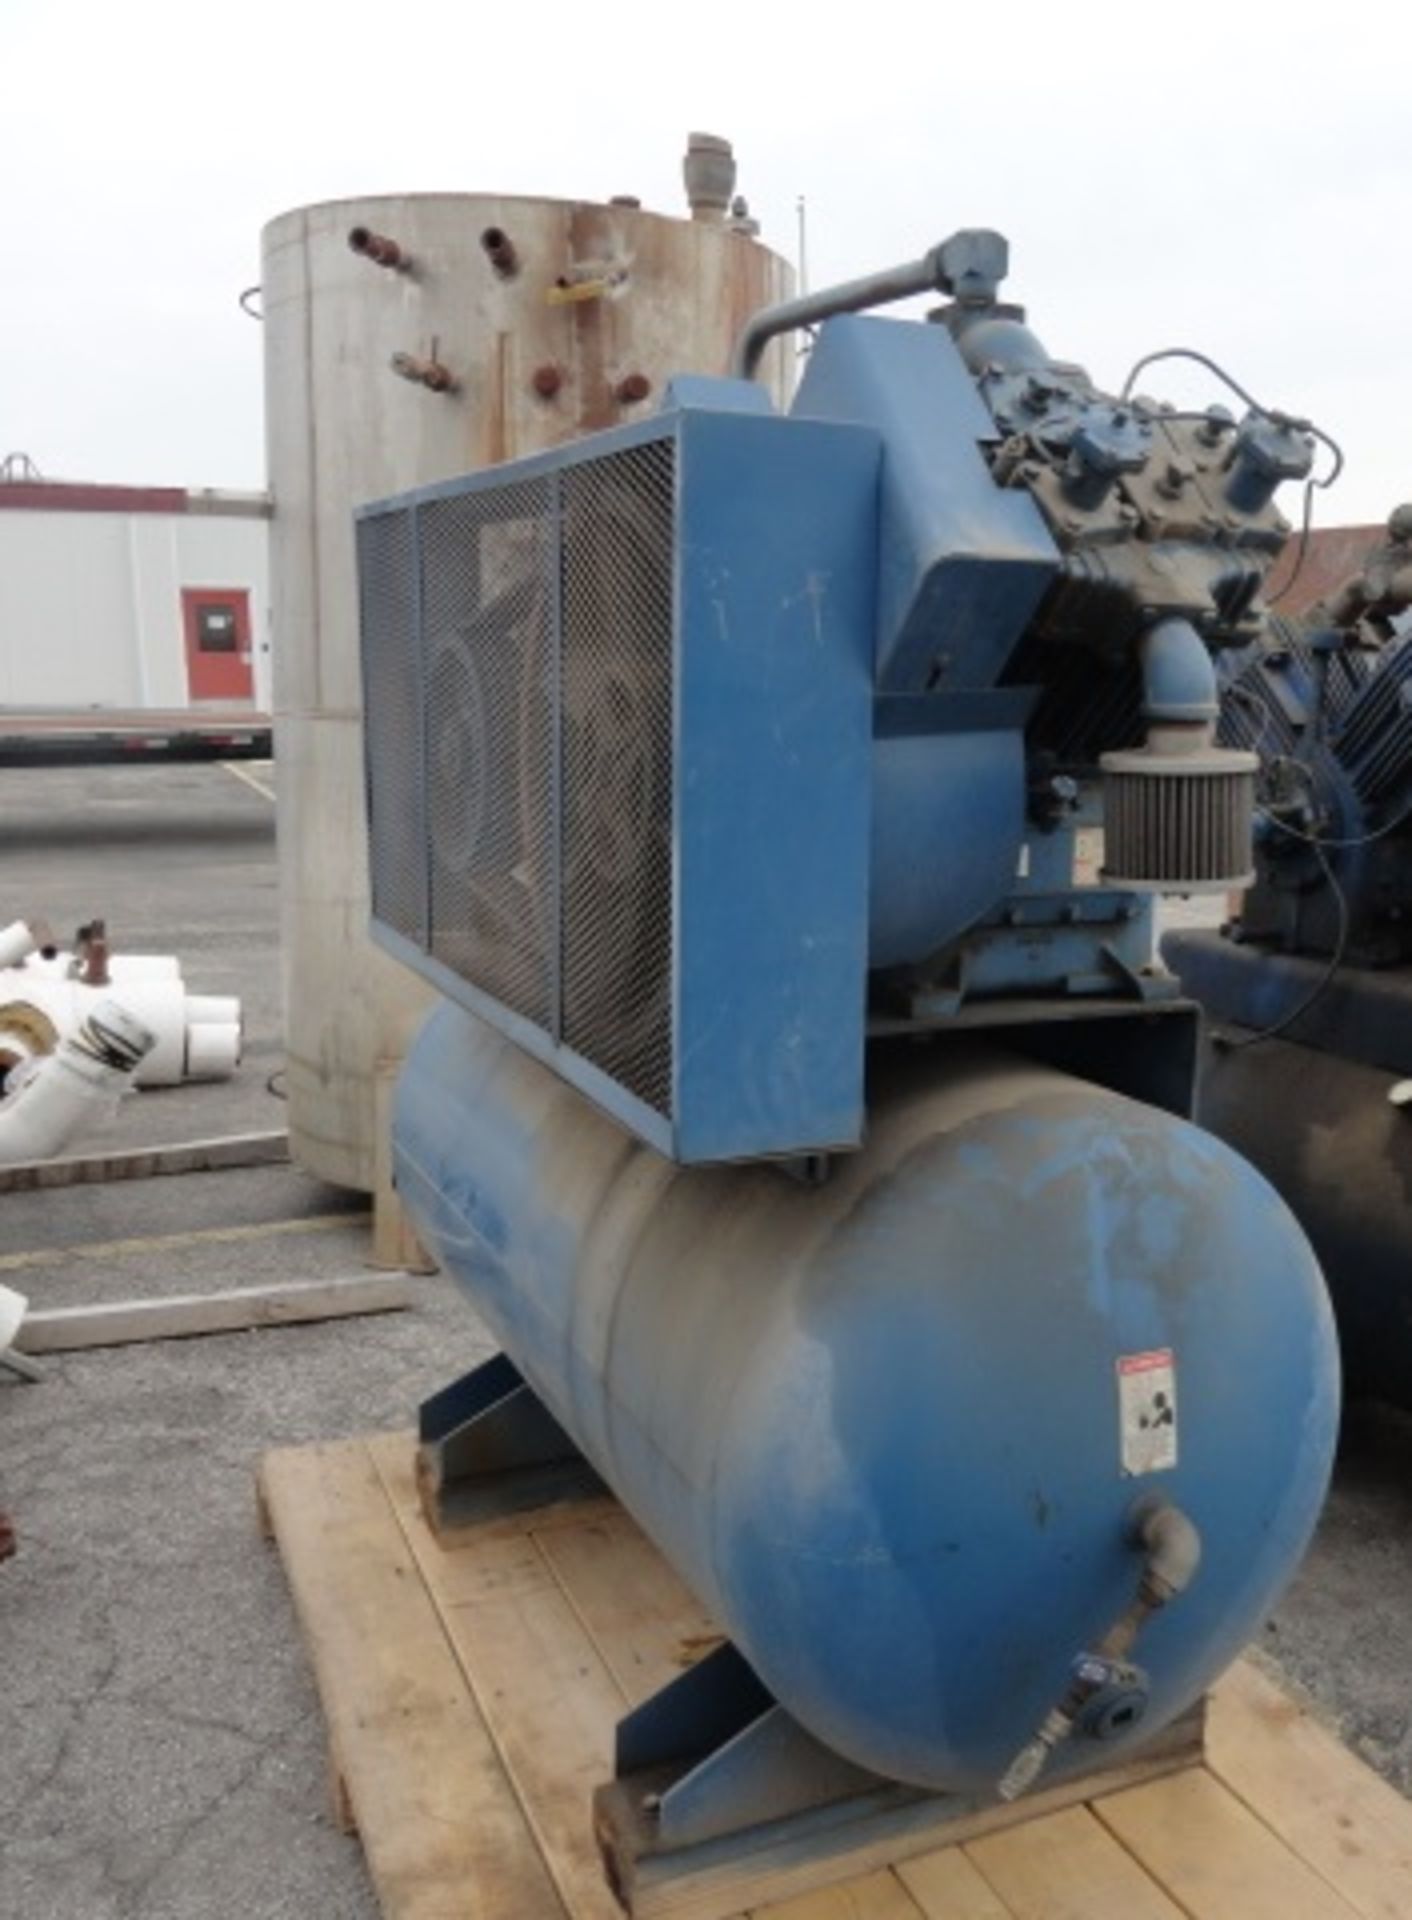 QUINCY AIR COMPRESSOR, 25 HP BELT DRIVE. MD# 5120. SN: 6049792. - Image 3 of 3